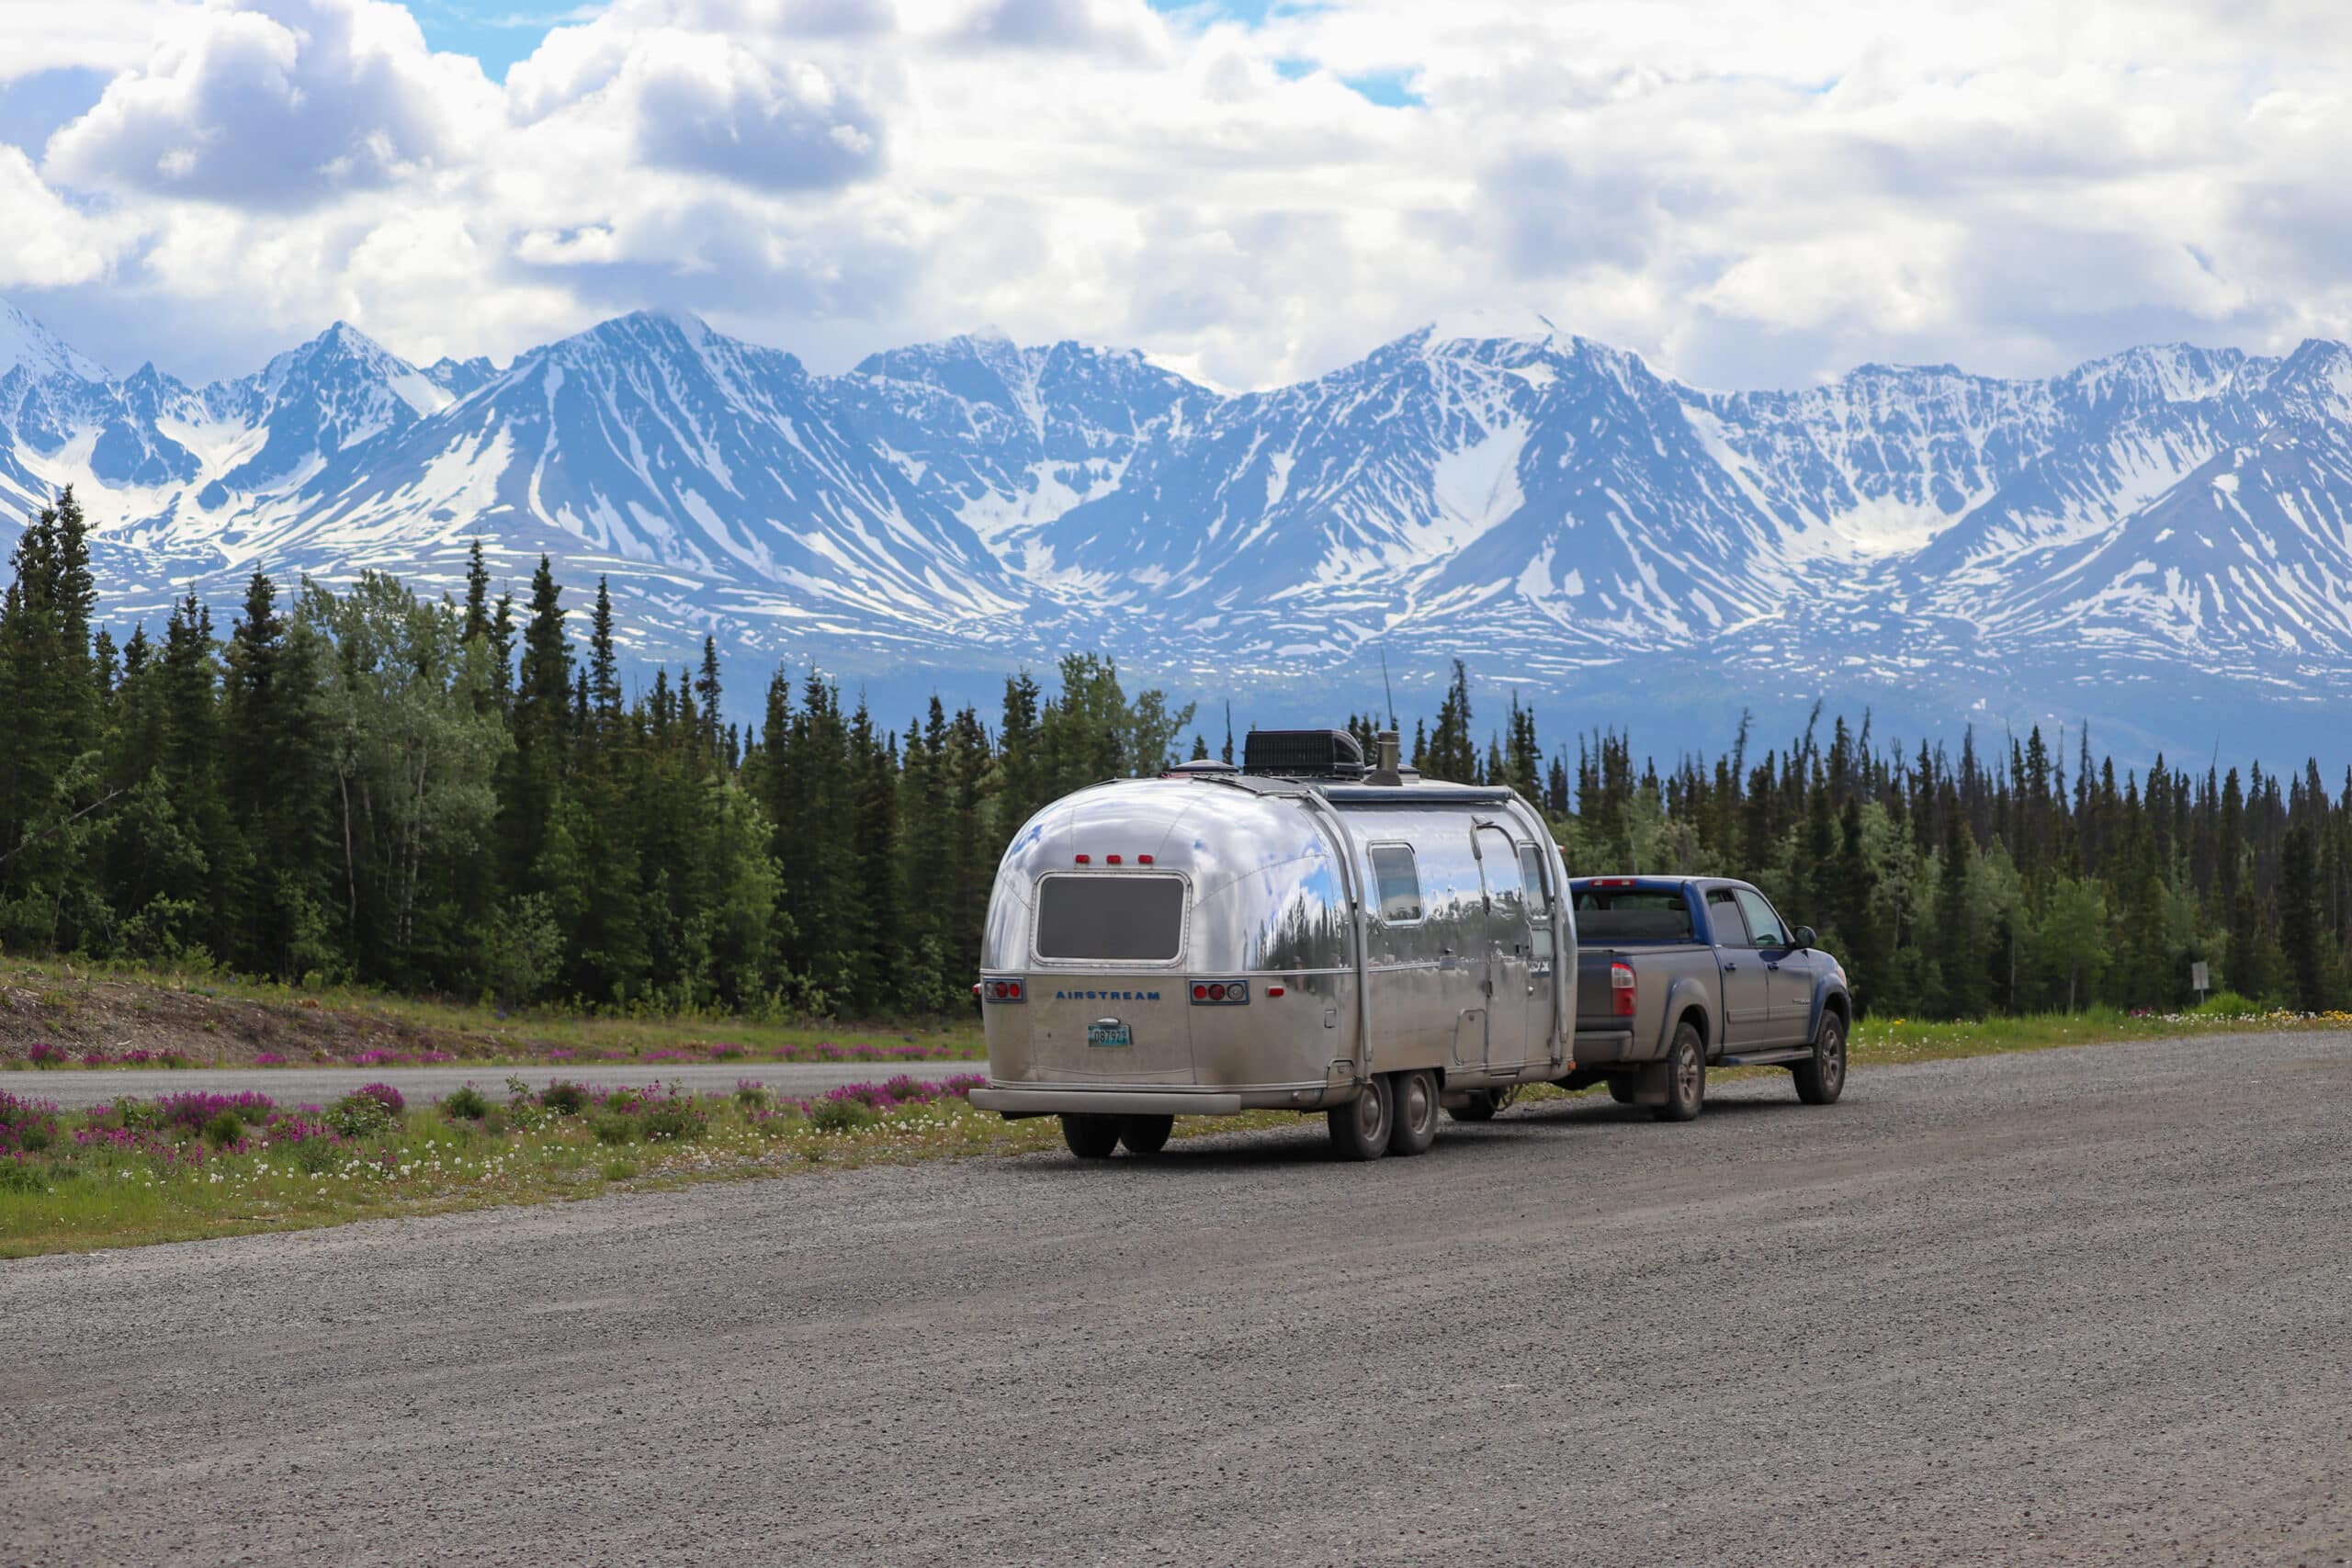 Slow Car Fast Home's Airstream on a Road in Alaska Surrounded by Snow-Covered Mountains